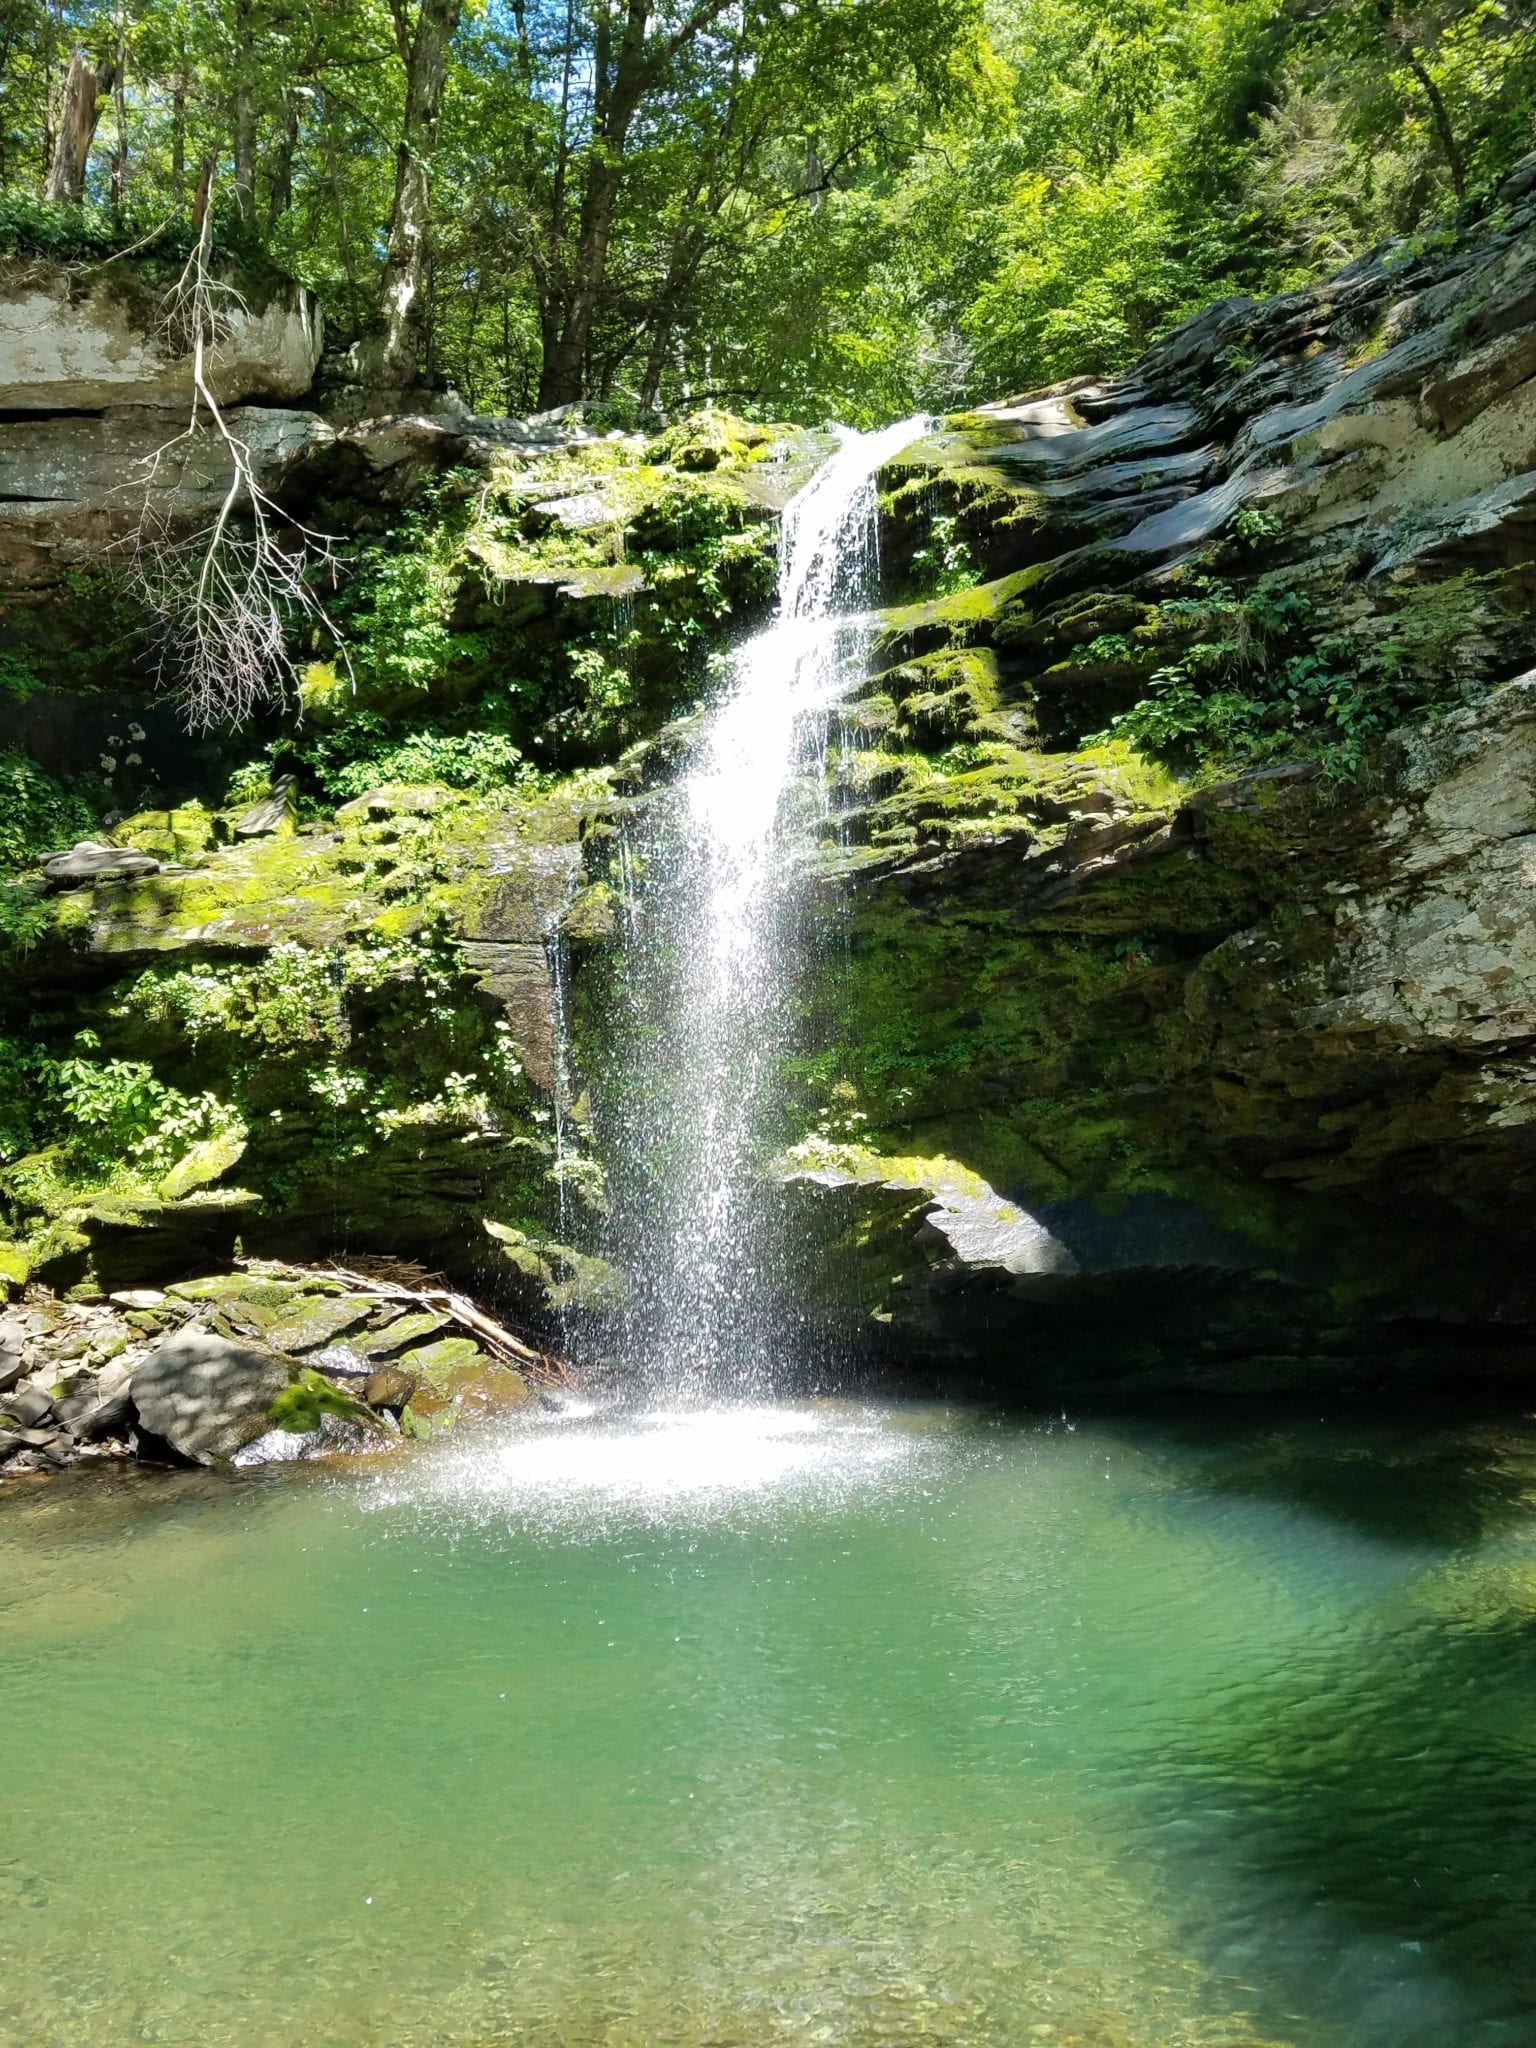 Erie County Forest, Waterfall at – Sardinia Twn, Erie